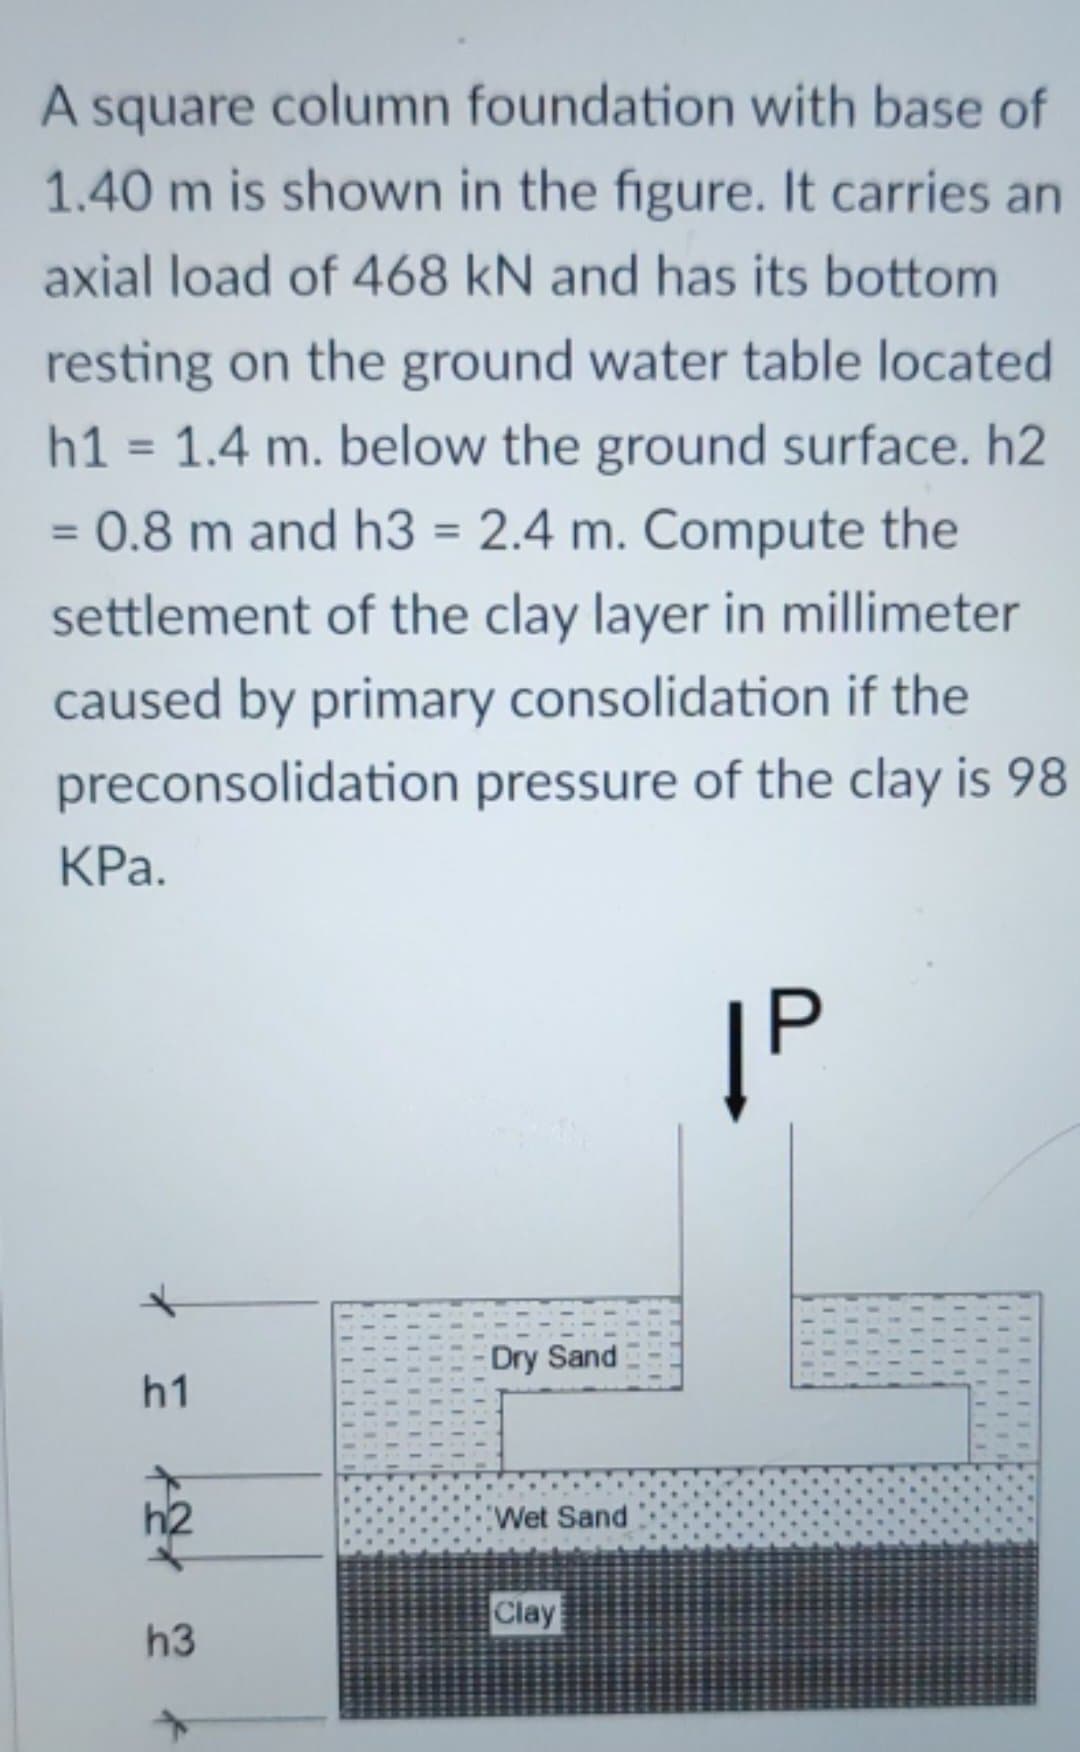 A square column foundation with base of
1.40 m is shown in the figure. It carries an
axial load of 468 kN and has its bottom.
resting on the ground water table located
h1 = 1.4 m. below the ground surface. h2
= 0.8 m and h3 = 2.4 m. Compute the
settlement of the clay layer in millimeter
caused by primary consolidation if the
preconsolidation pressure of the clay is 98
KPa.
|P
*
h1
3
h3
+
1.1.1
ECCE
ELLET
ELEEEEE
- Dry Sand
Wet Sand
Clay
ELI
ELI
LELLFIE